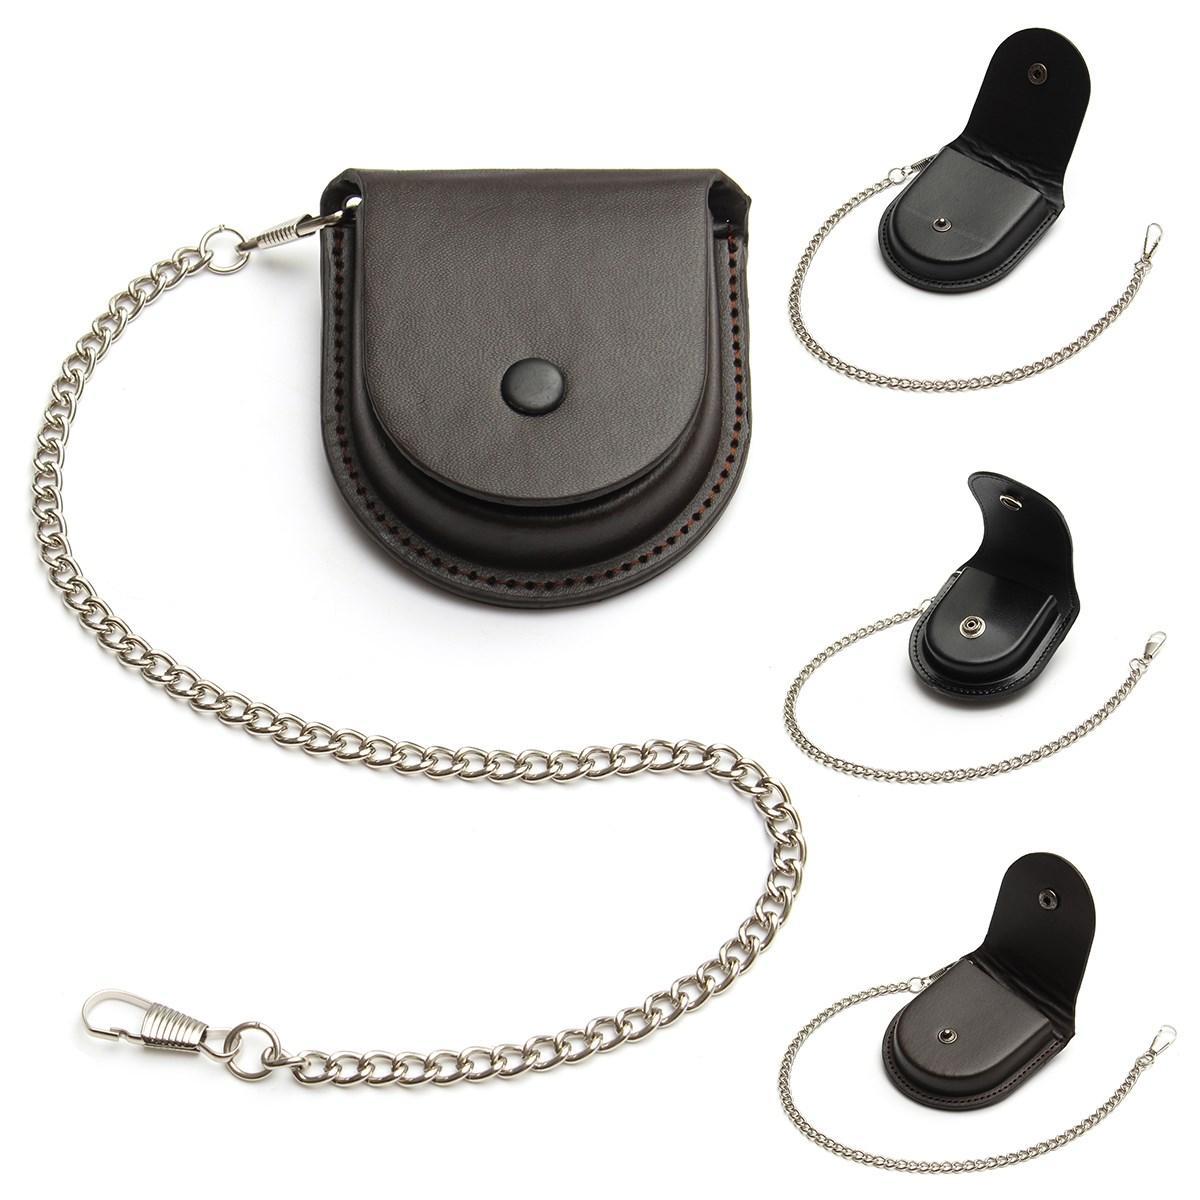 [ postage our company charge ] pocket watch holder box pouch portable waist bag leather storage case BB5048-02bk 2. black 